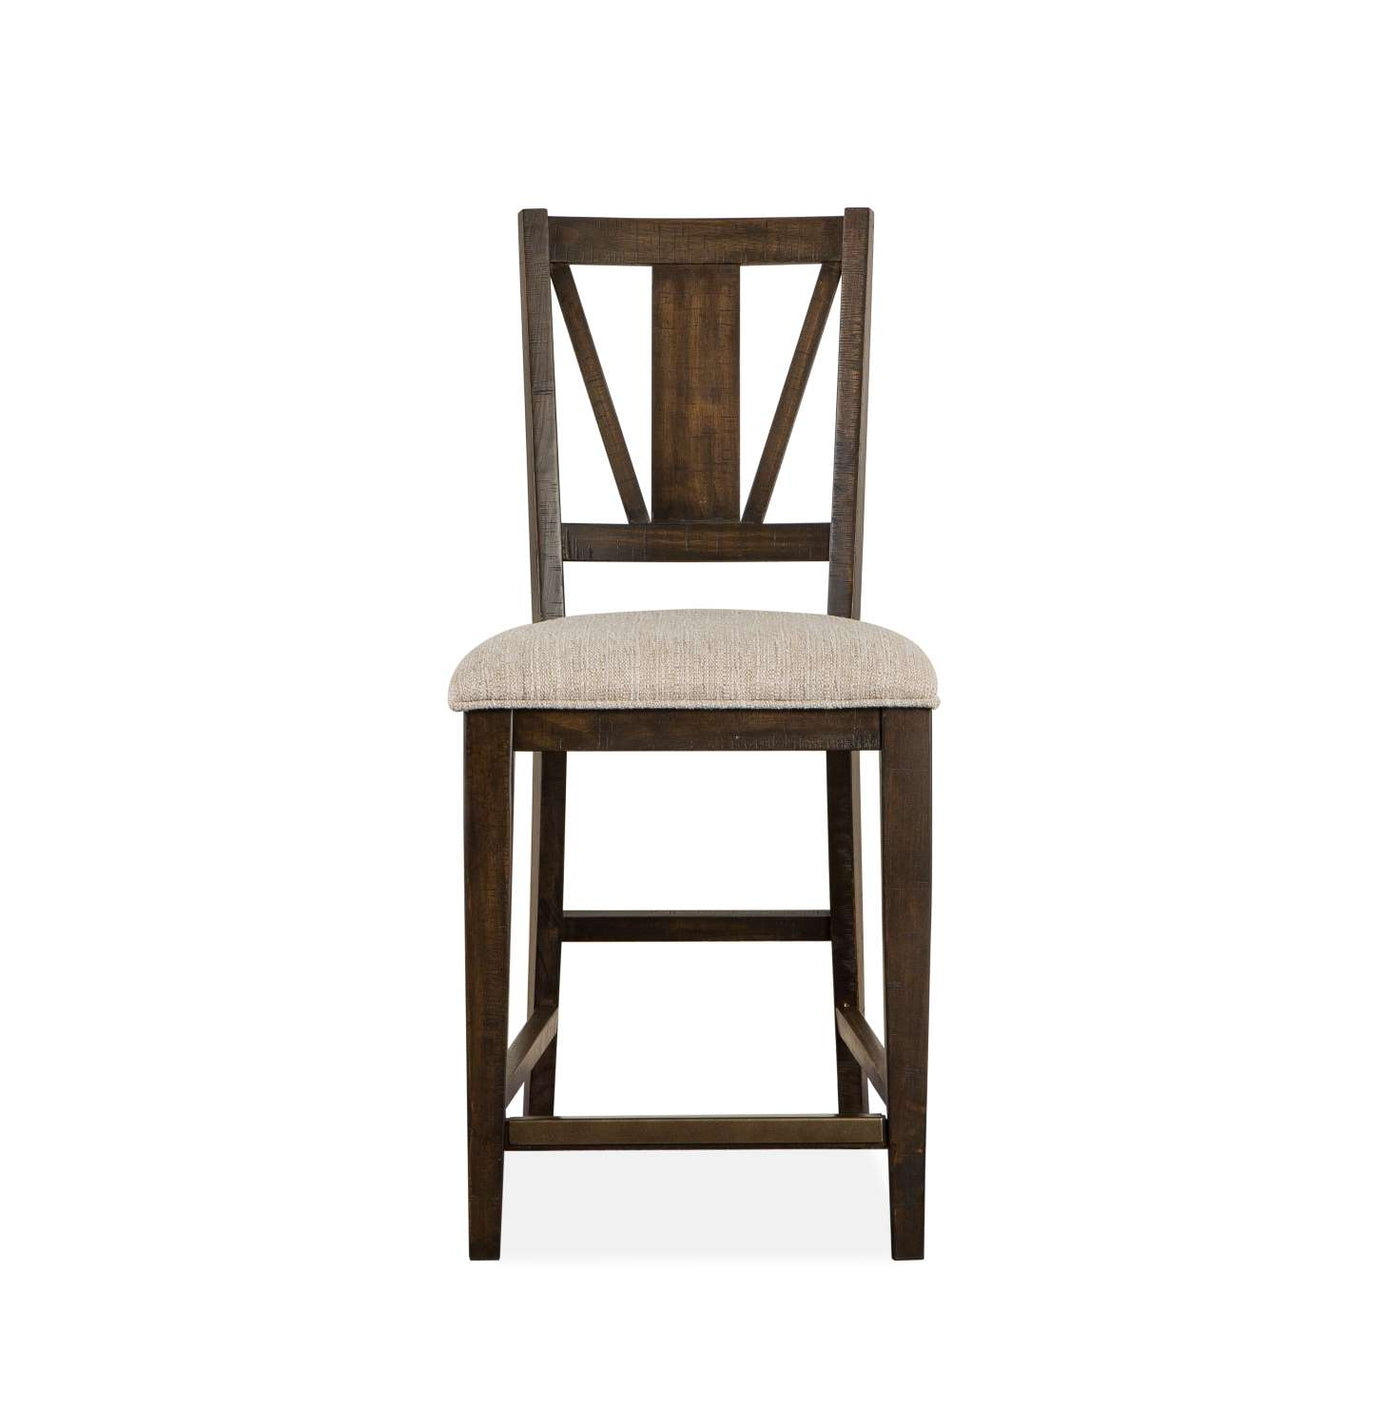 Westley Falls Counter Height Stool with Upholstered Seat - Brown